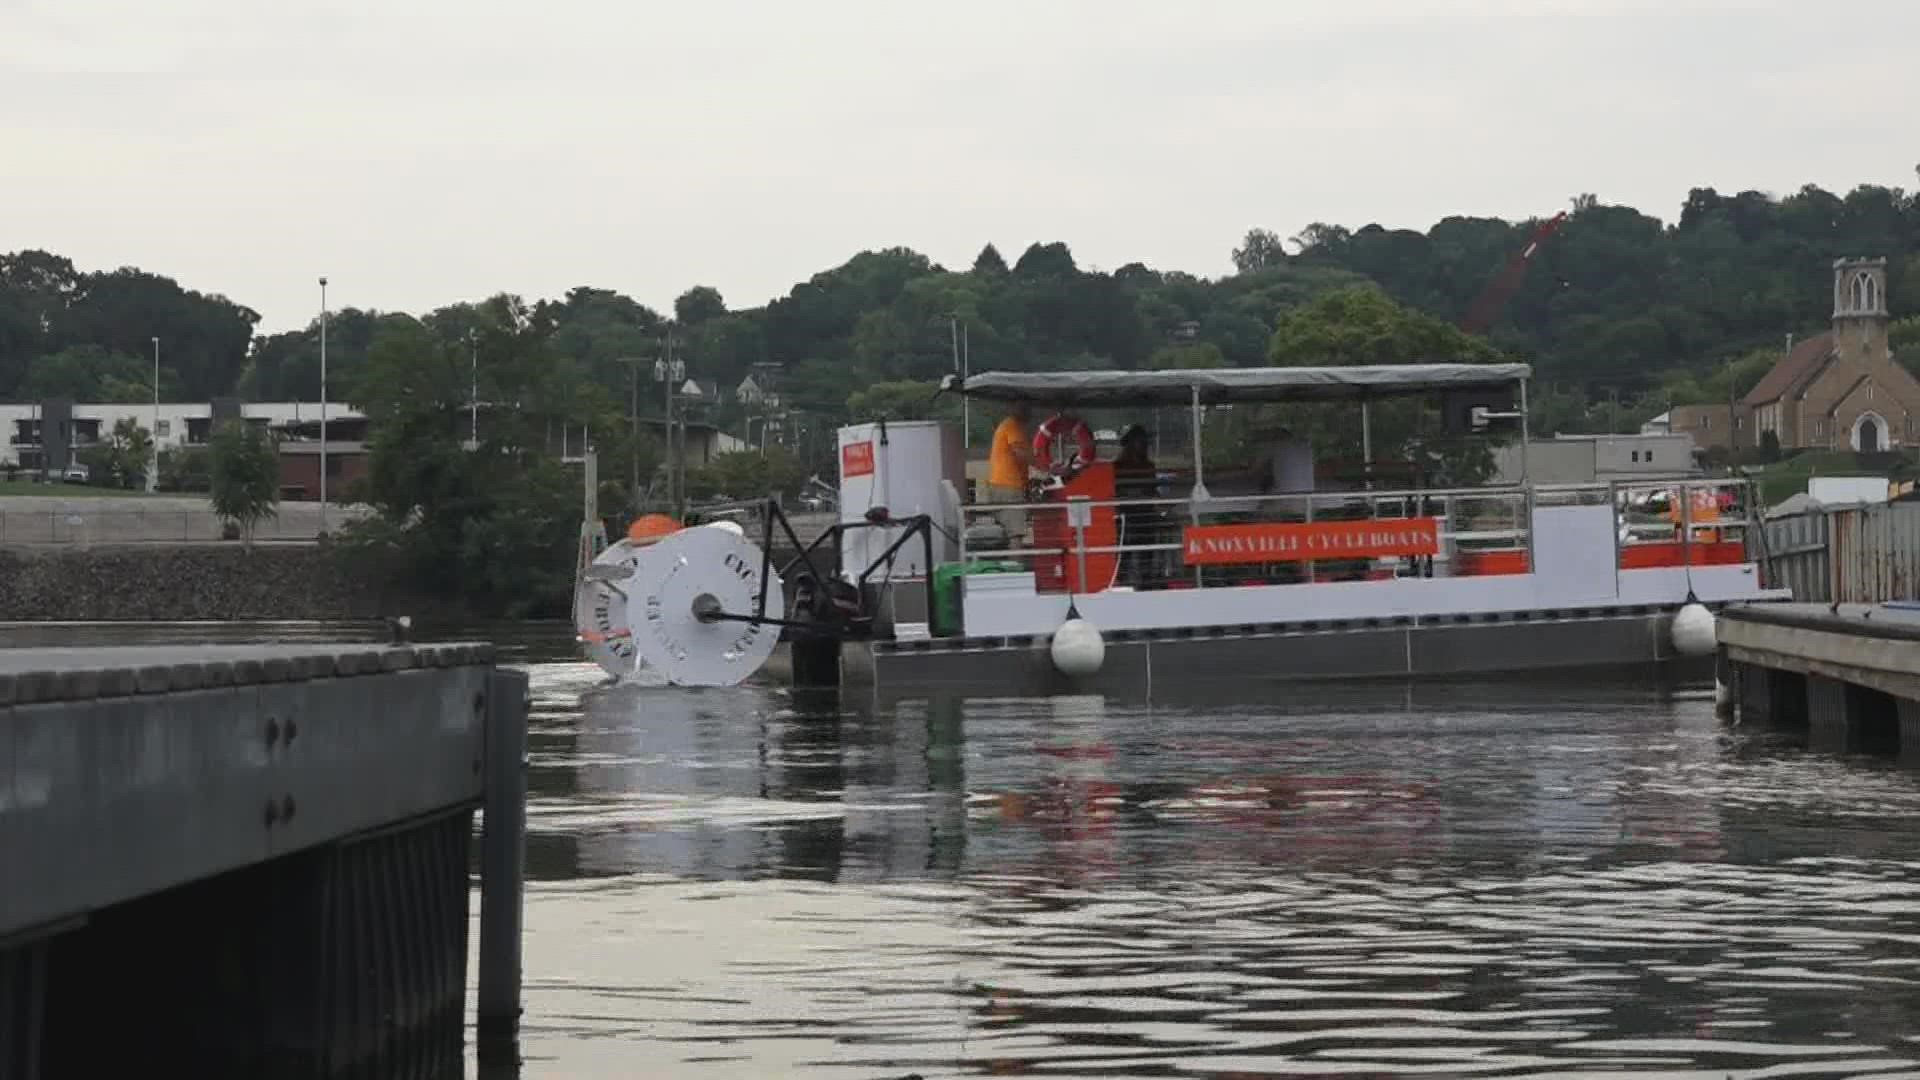 It's a new way to see Knoxville while getting your heart rate up with a drink in your hand. Knoxville Cycleboats is a floating pedal tavern filled with fun.